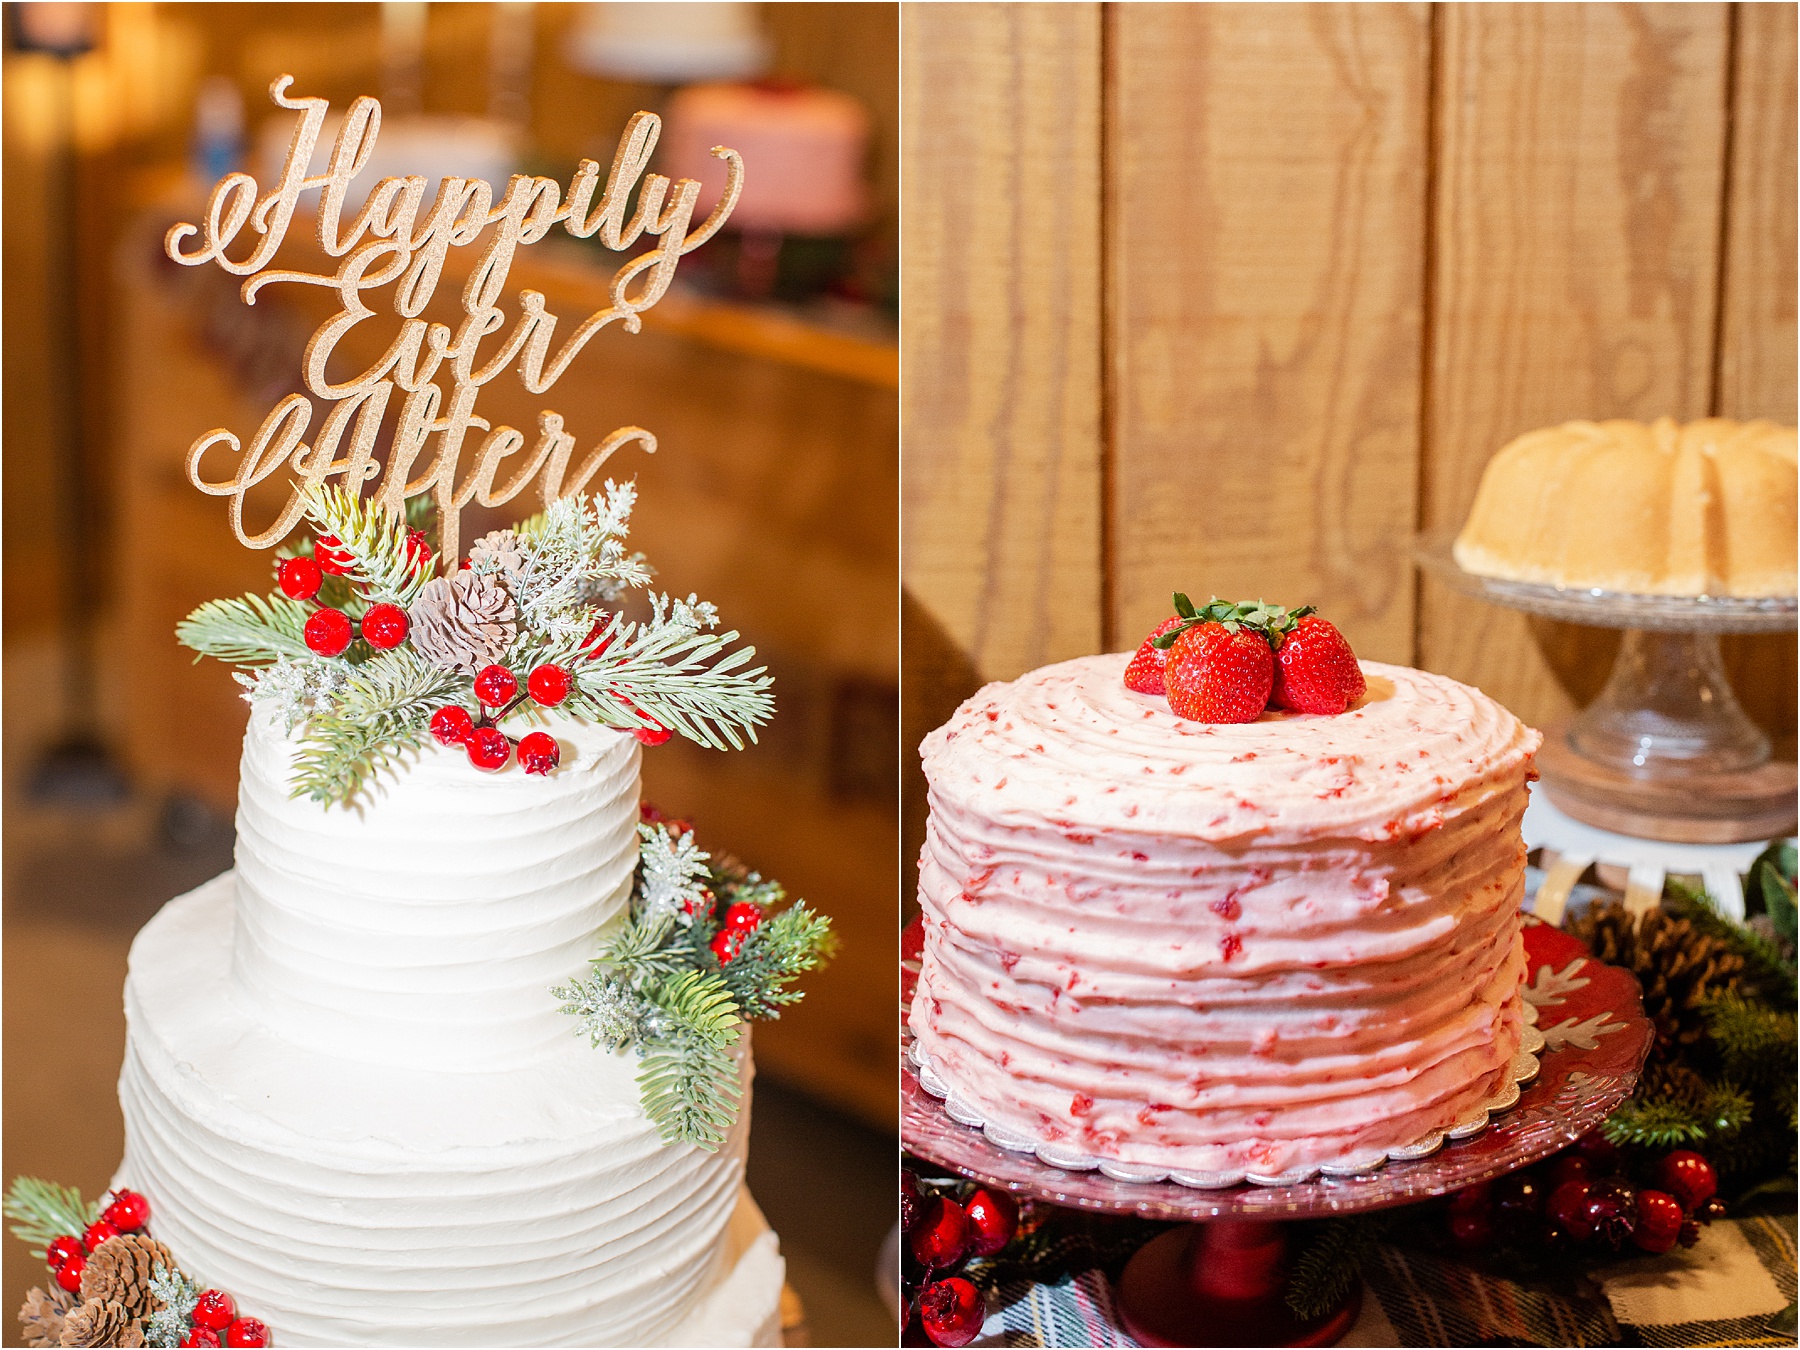 pictures of a wedding cake and a strawberry cake at a reception